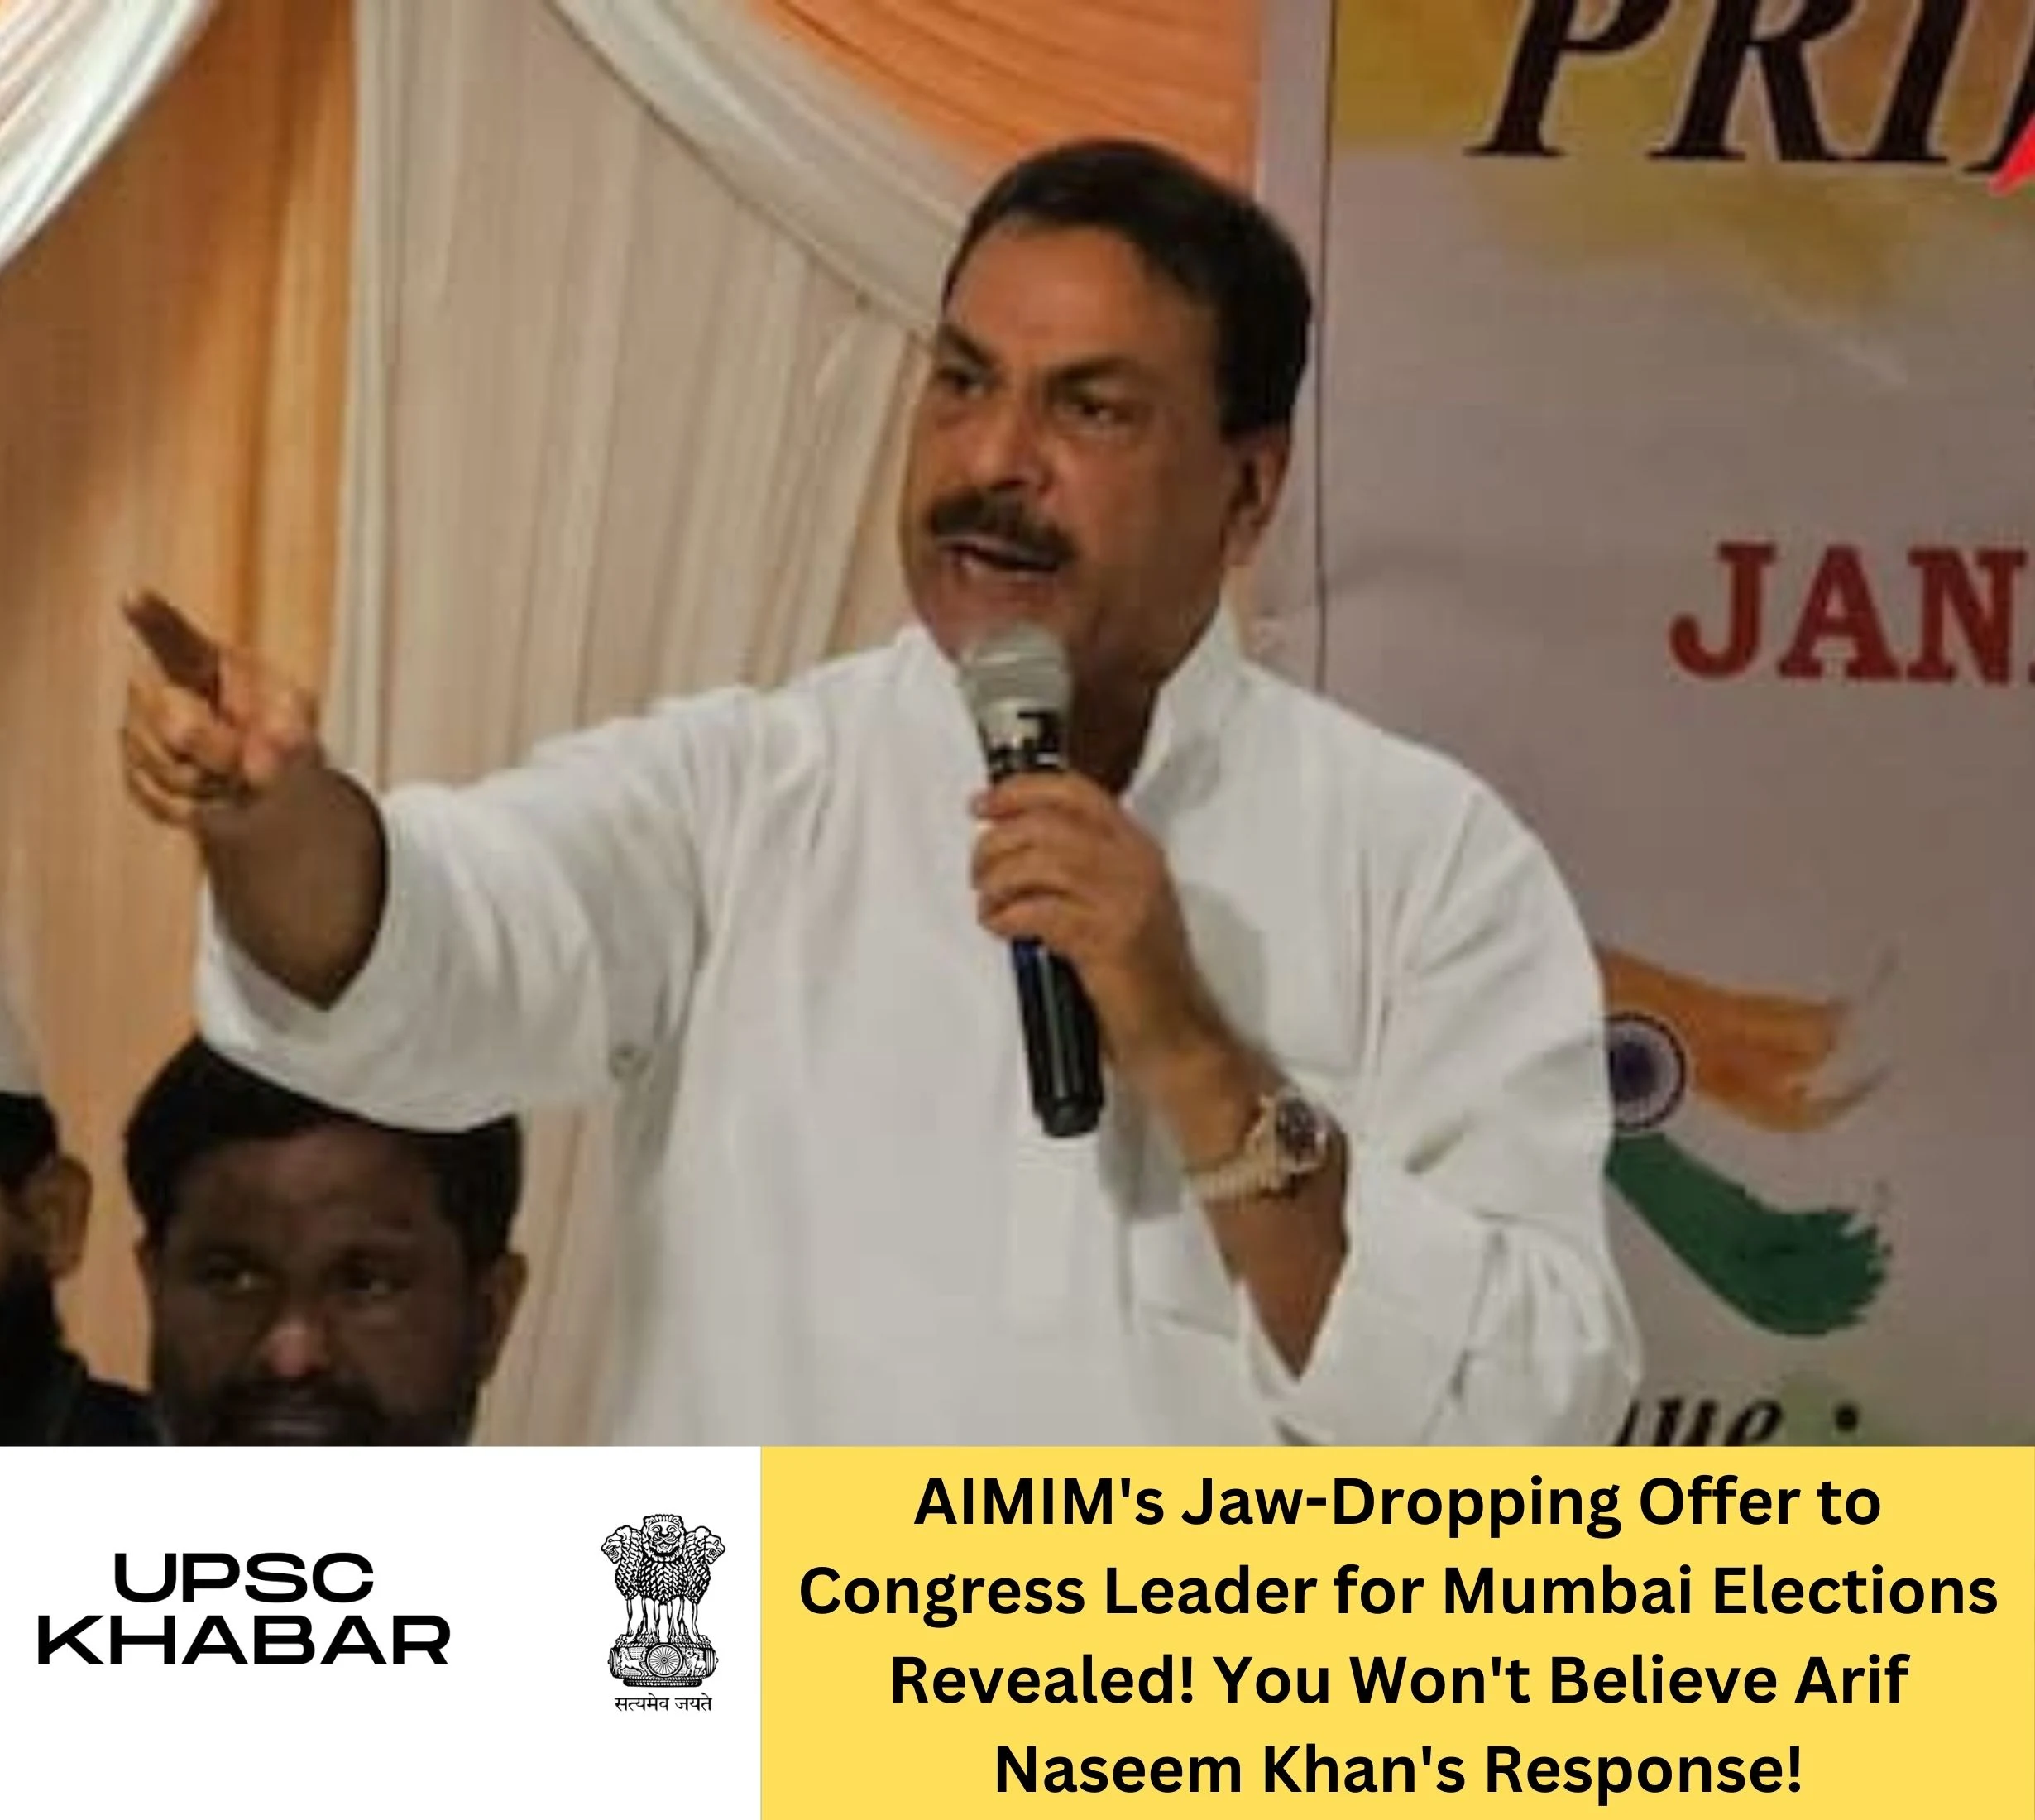 AIMIM's Jaw-Dropping Offer to Congress Leader for Mumbai Elections Revealed! You Won't Believe Arif Naseem Khan's Response!